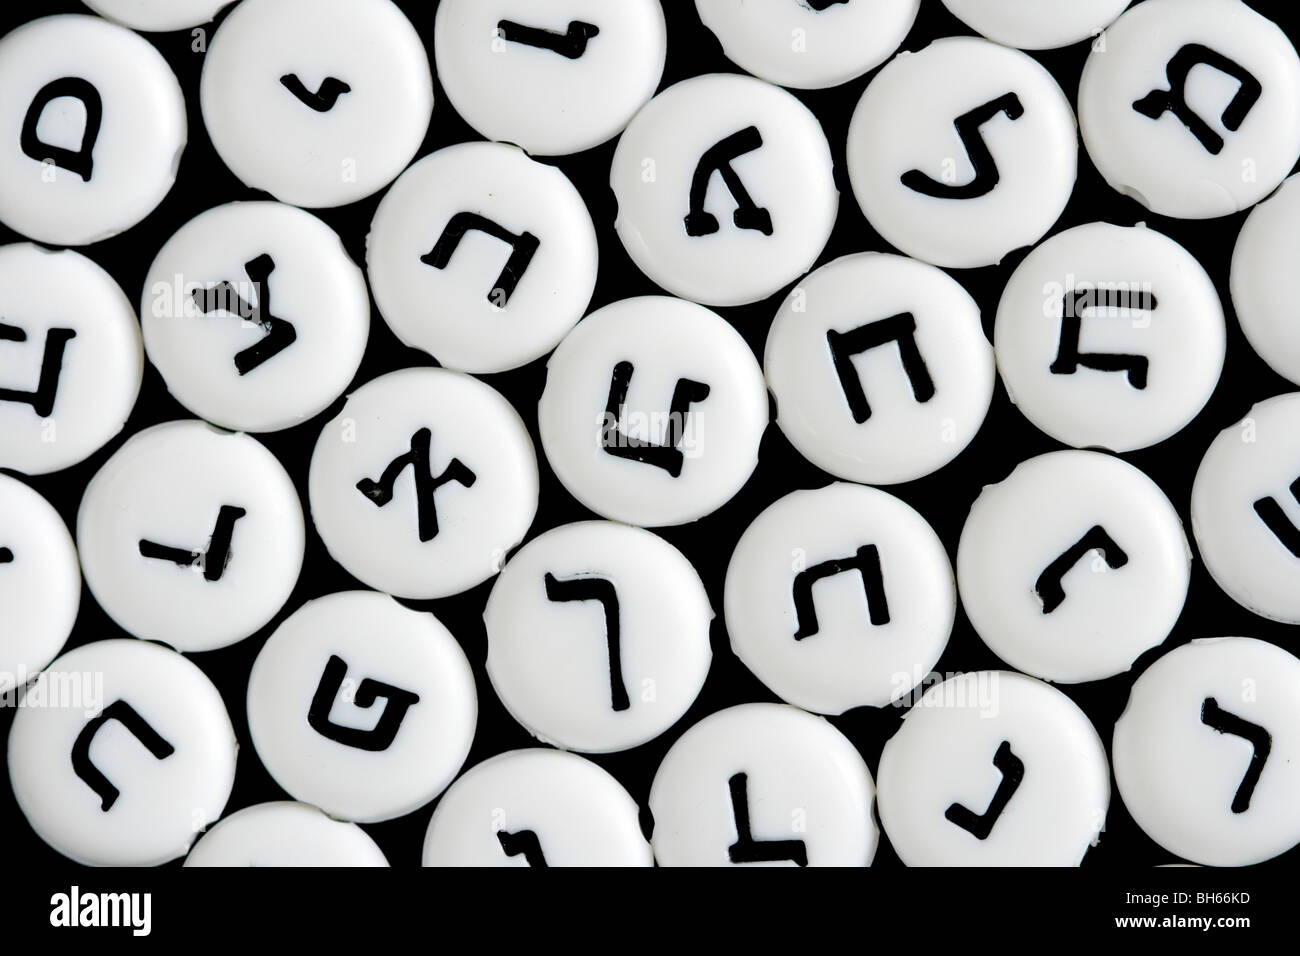 hebrew characters background Stock Photo